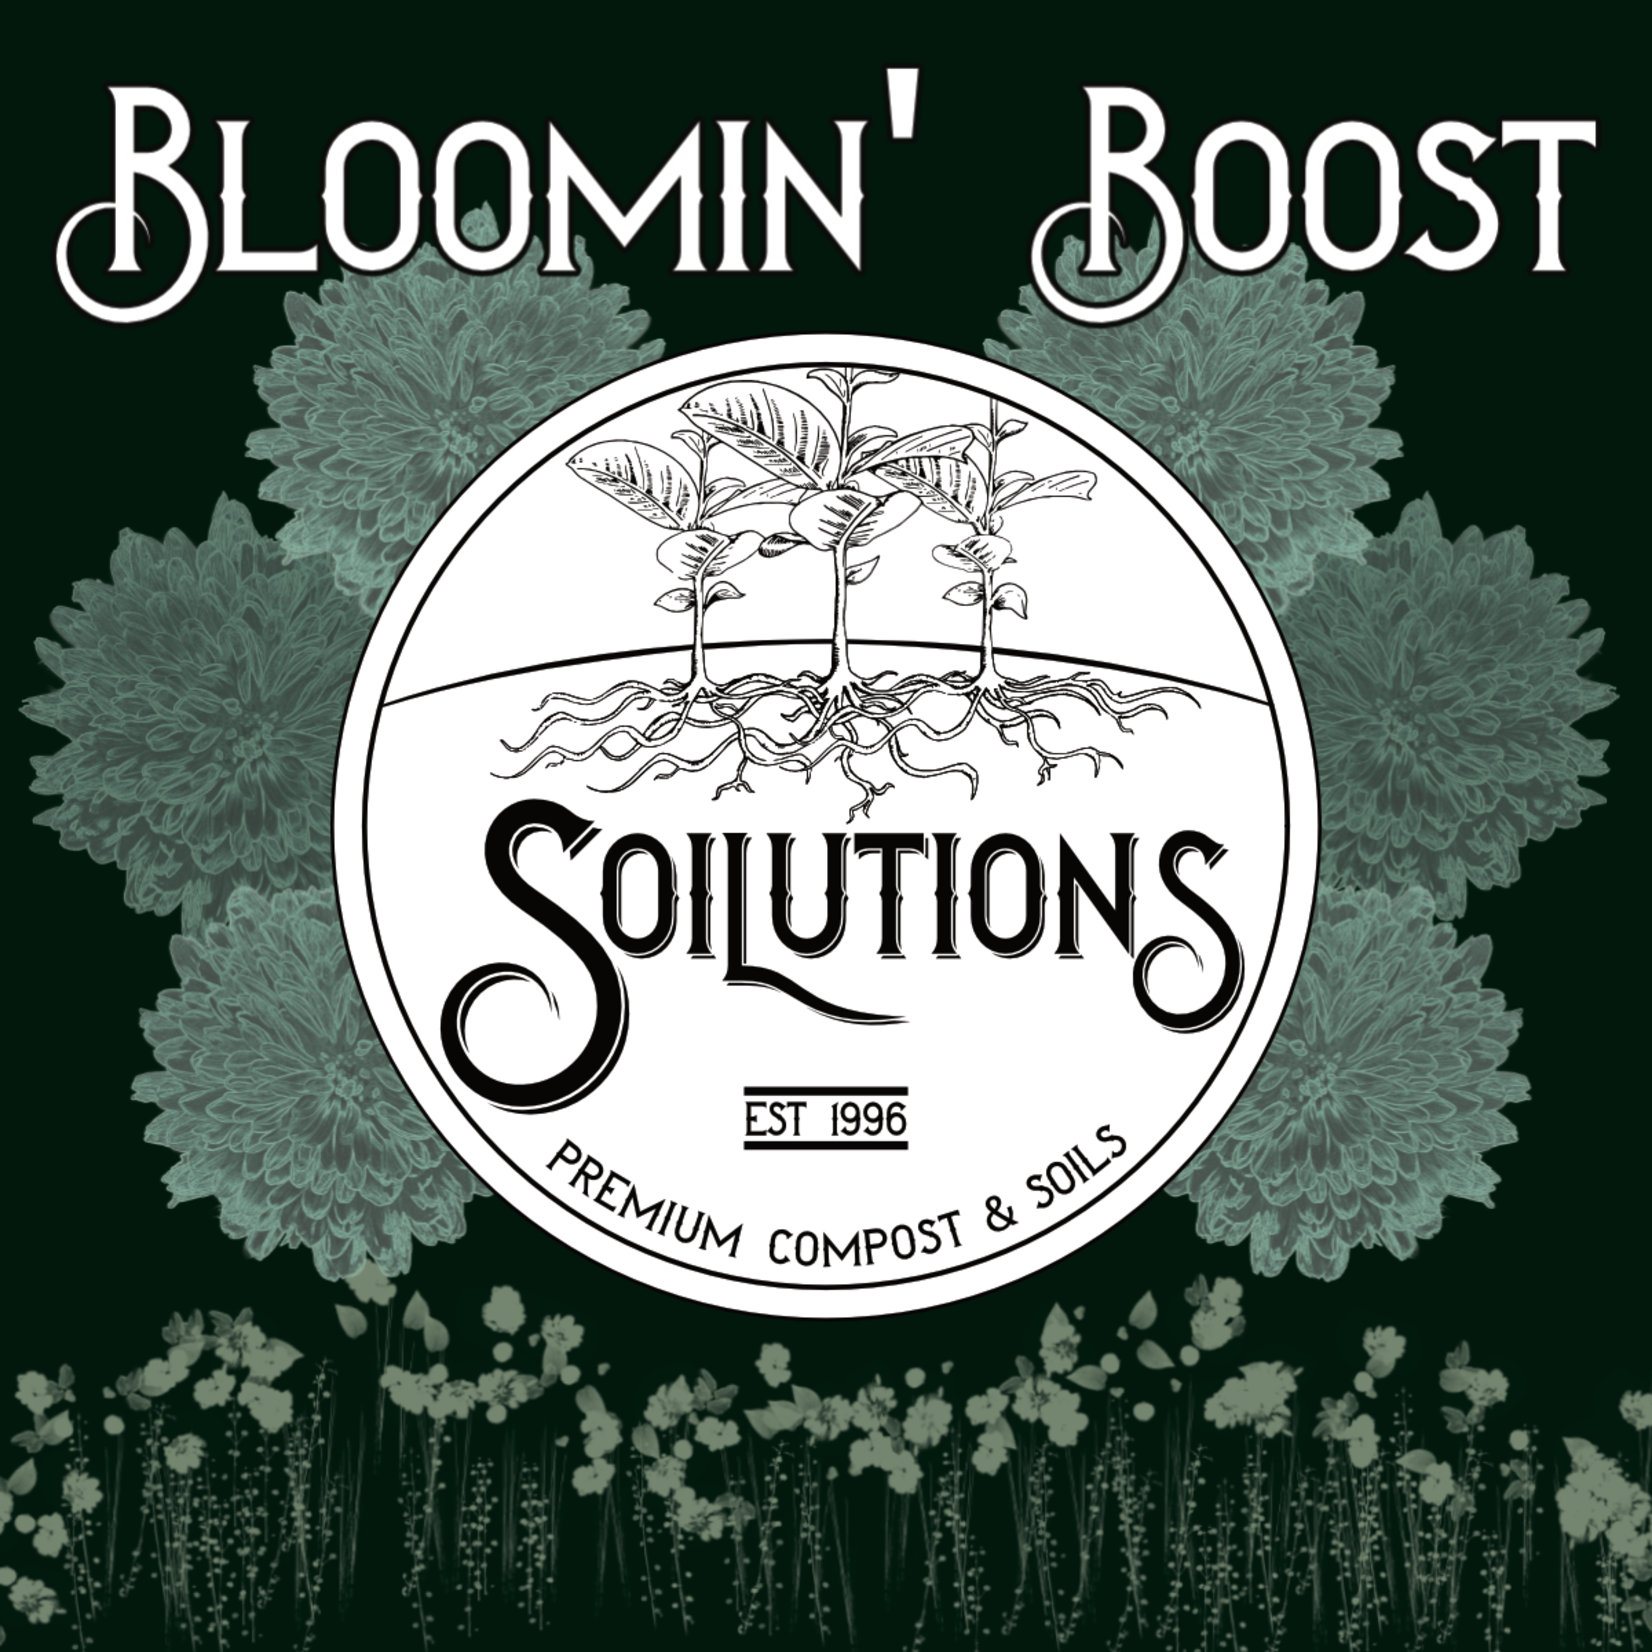 Soilutions Soilutions Bloomin' Boost, 1.9-10.5-2, 2 lb